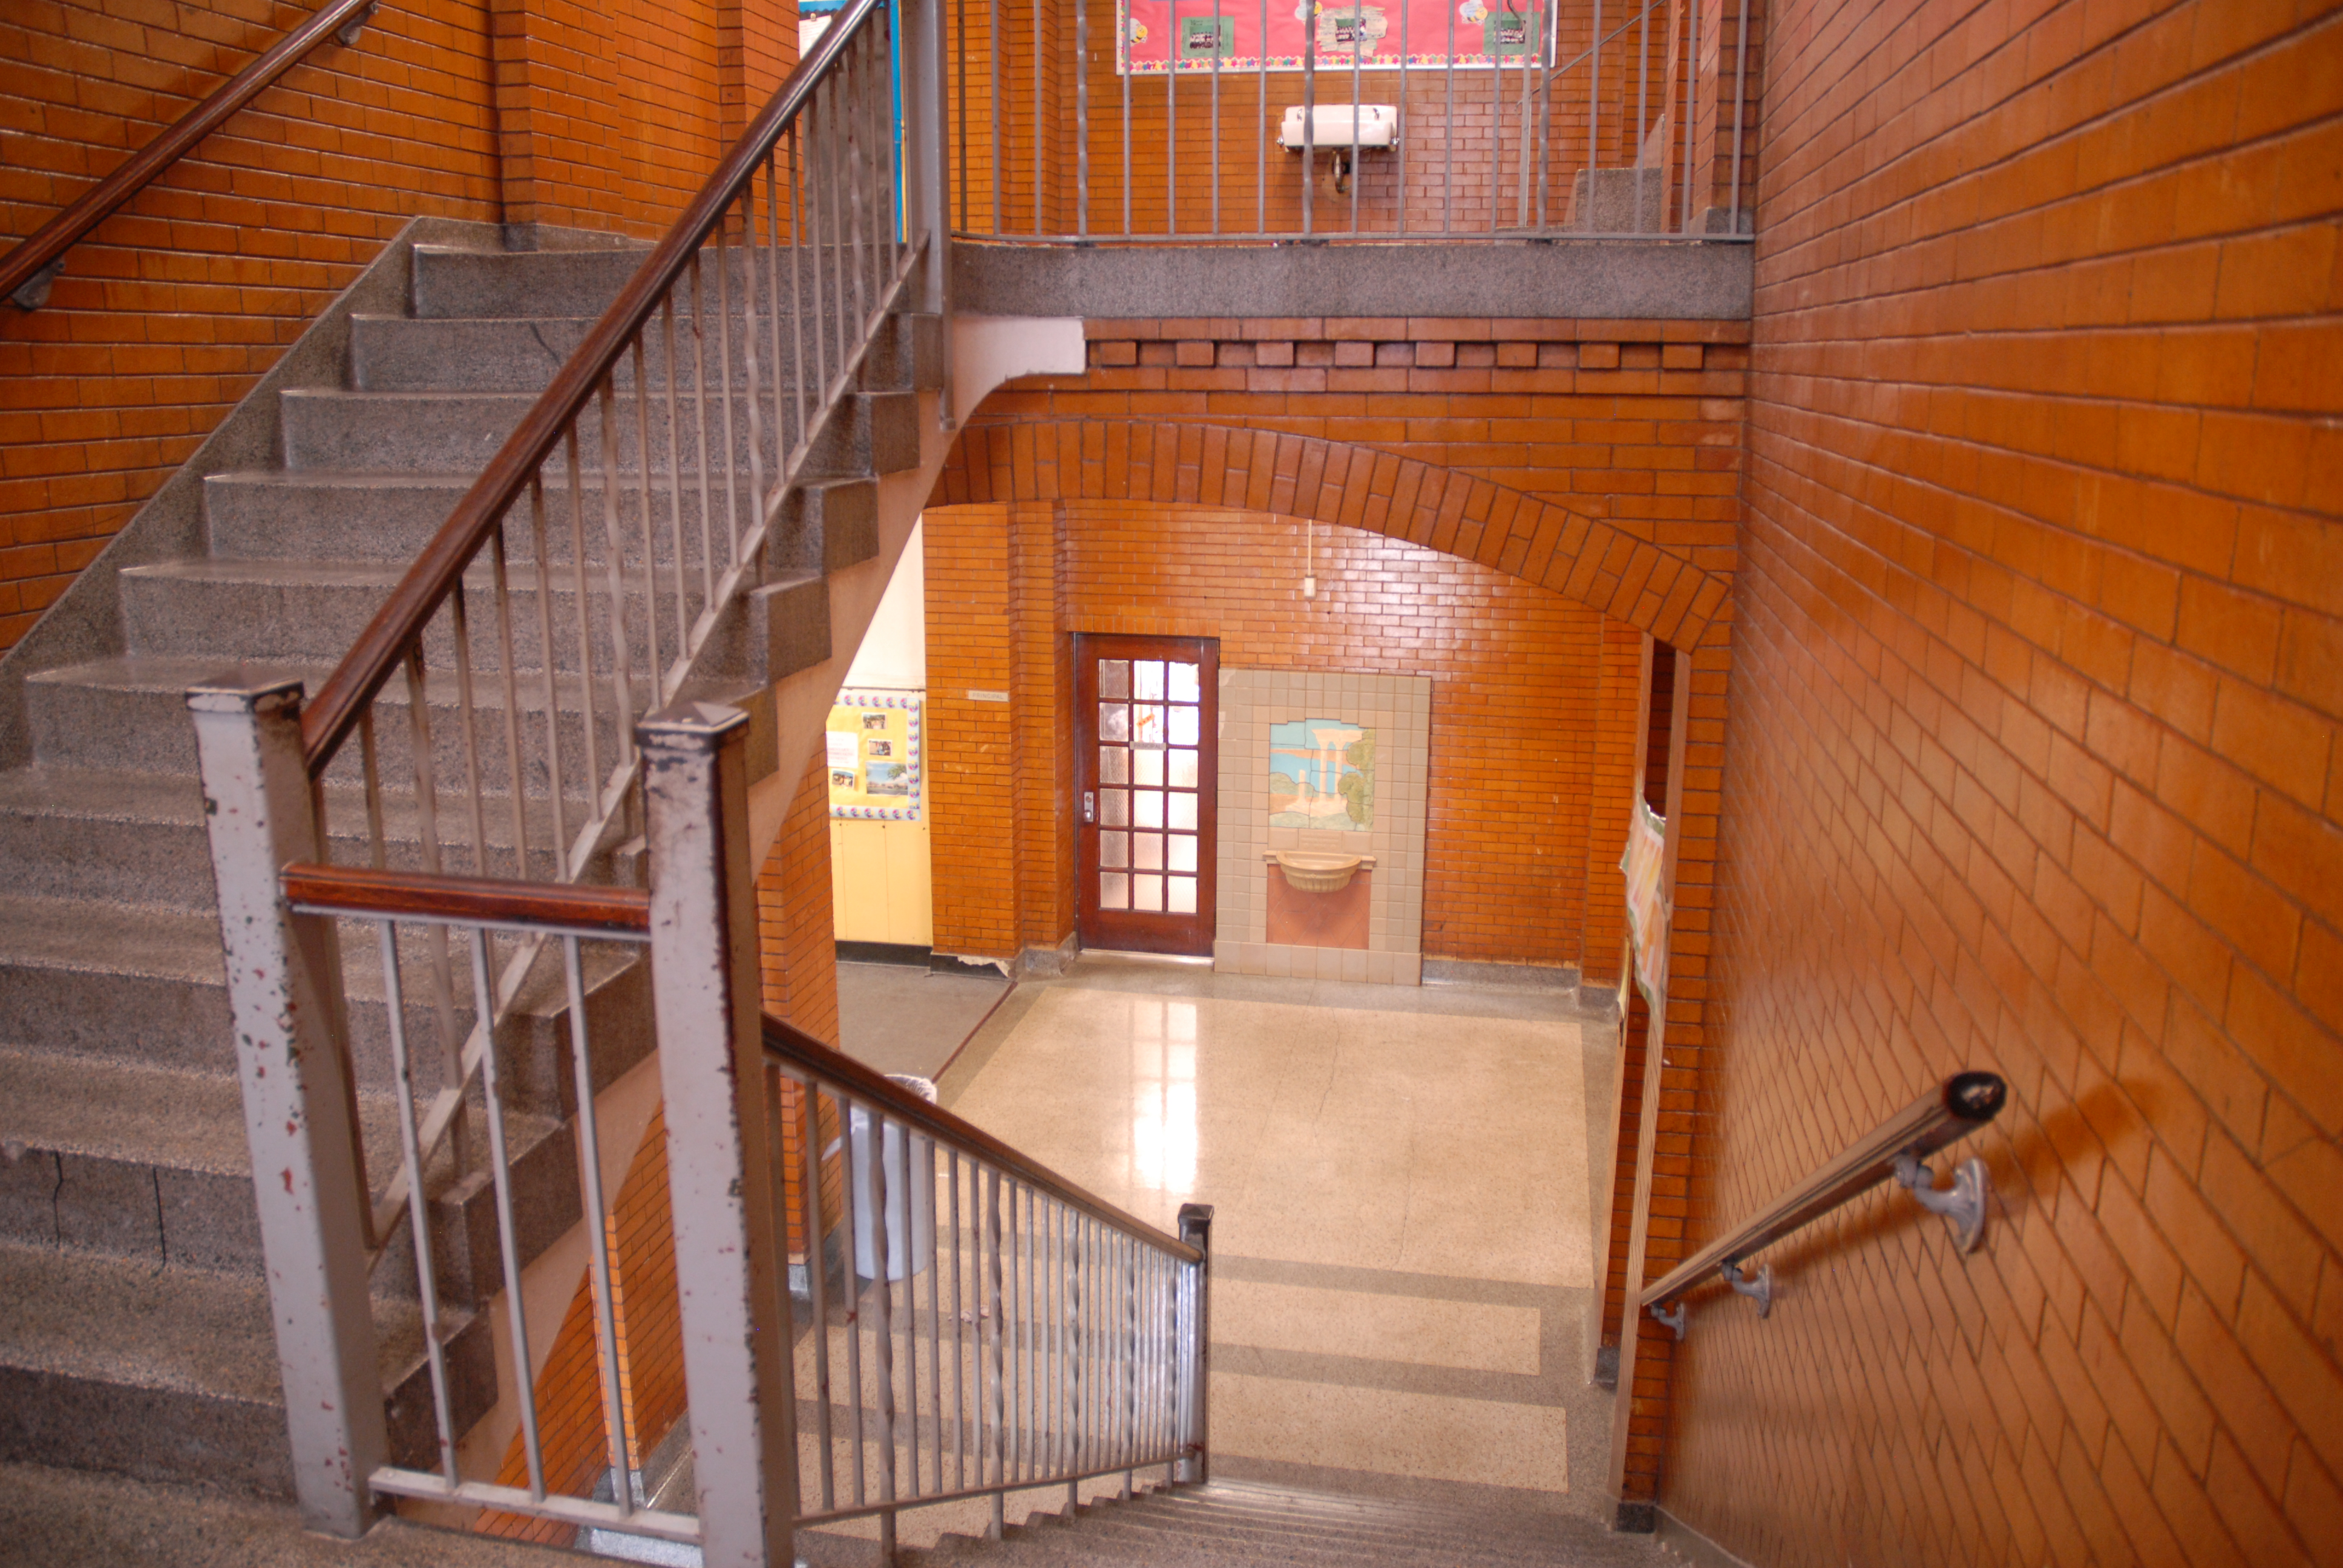 Remember running to your next class up these steps? This is the center stairwell of FHS facing Hillcrest. The Longnecker-Folger Rookwood Fountain can be seen under the archway as it stood during our years at Fairview. Photo by Robert Hauff, FHS '63.